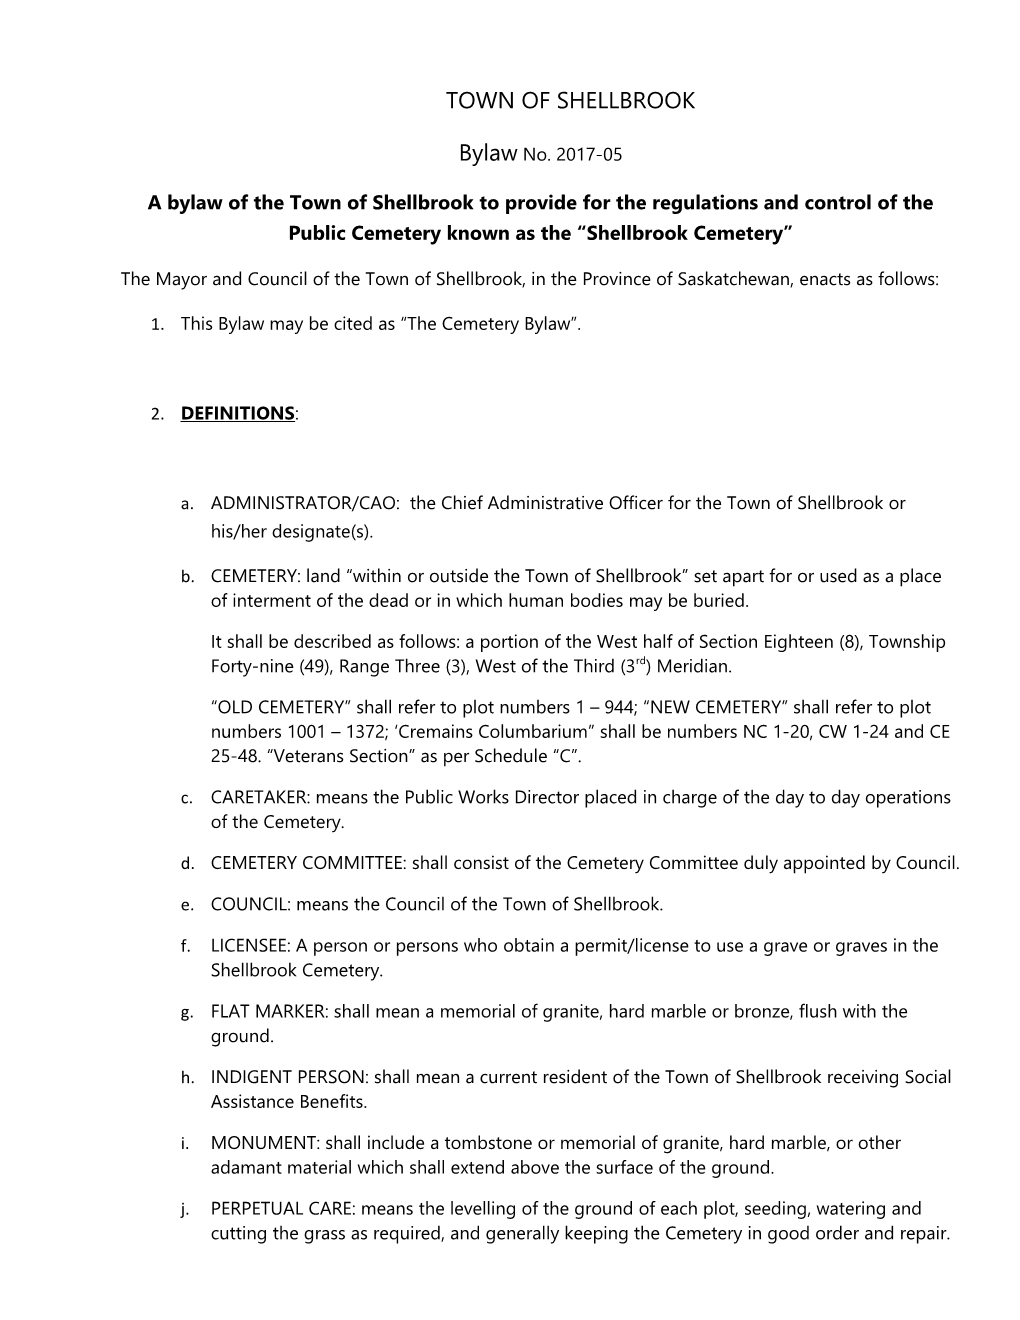 A Bylaw of the Town of Shellbrook to Provide for the Regulations and Control of the Public